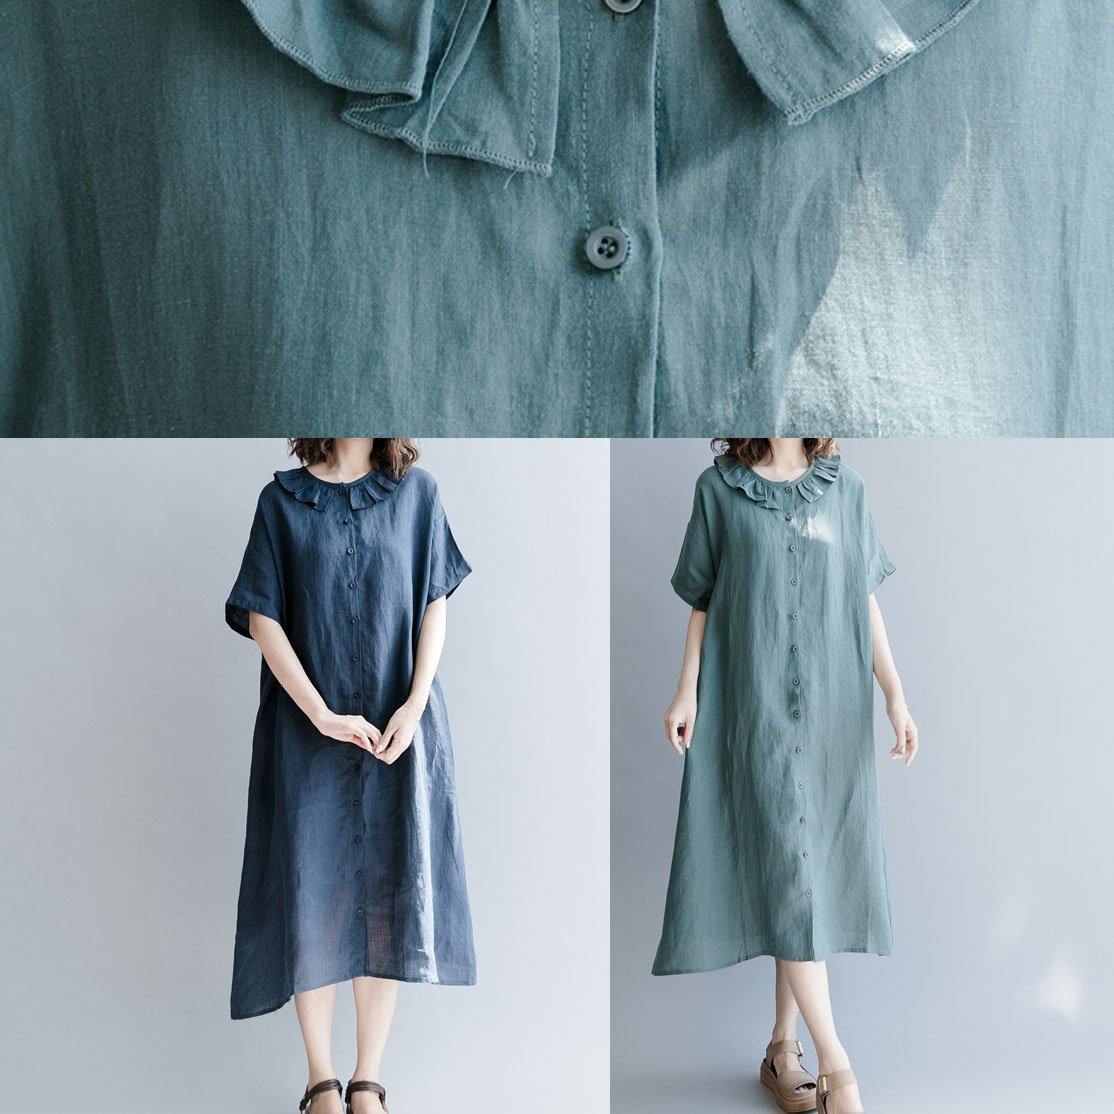 Vivid Peter pan Collar patchwork cotton linen quilting clothes Runway green Dresses summer - Omychic